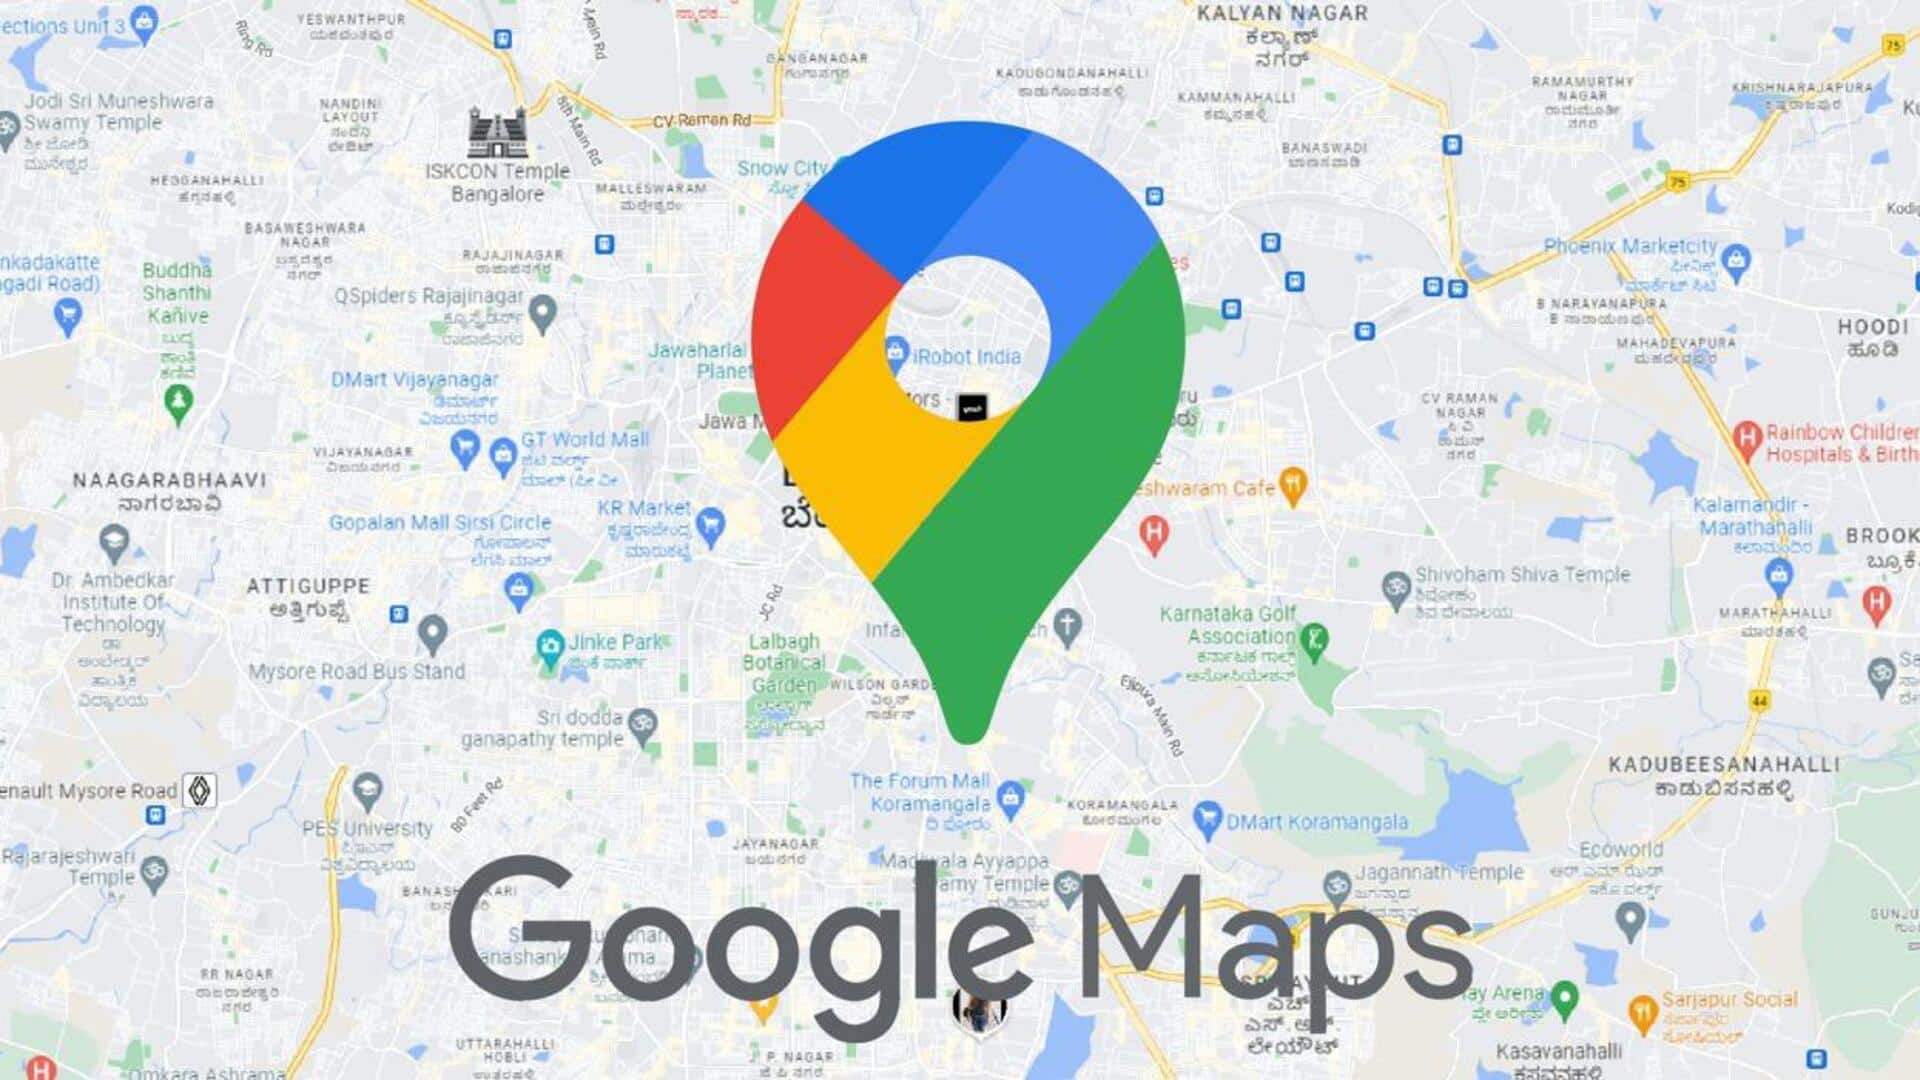 How to save locations on Google Maps using emojis